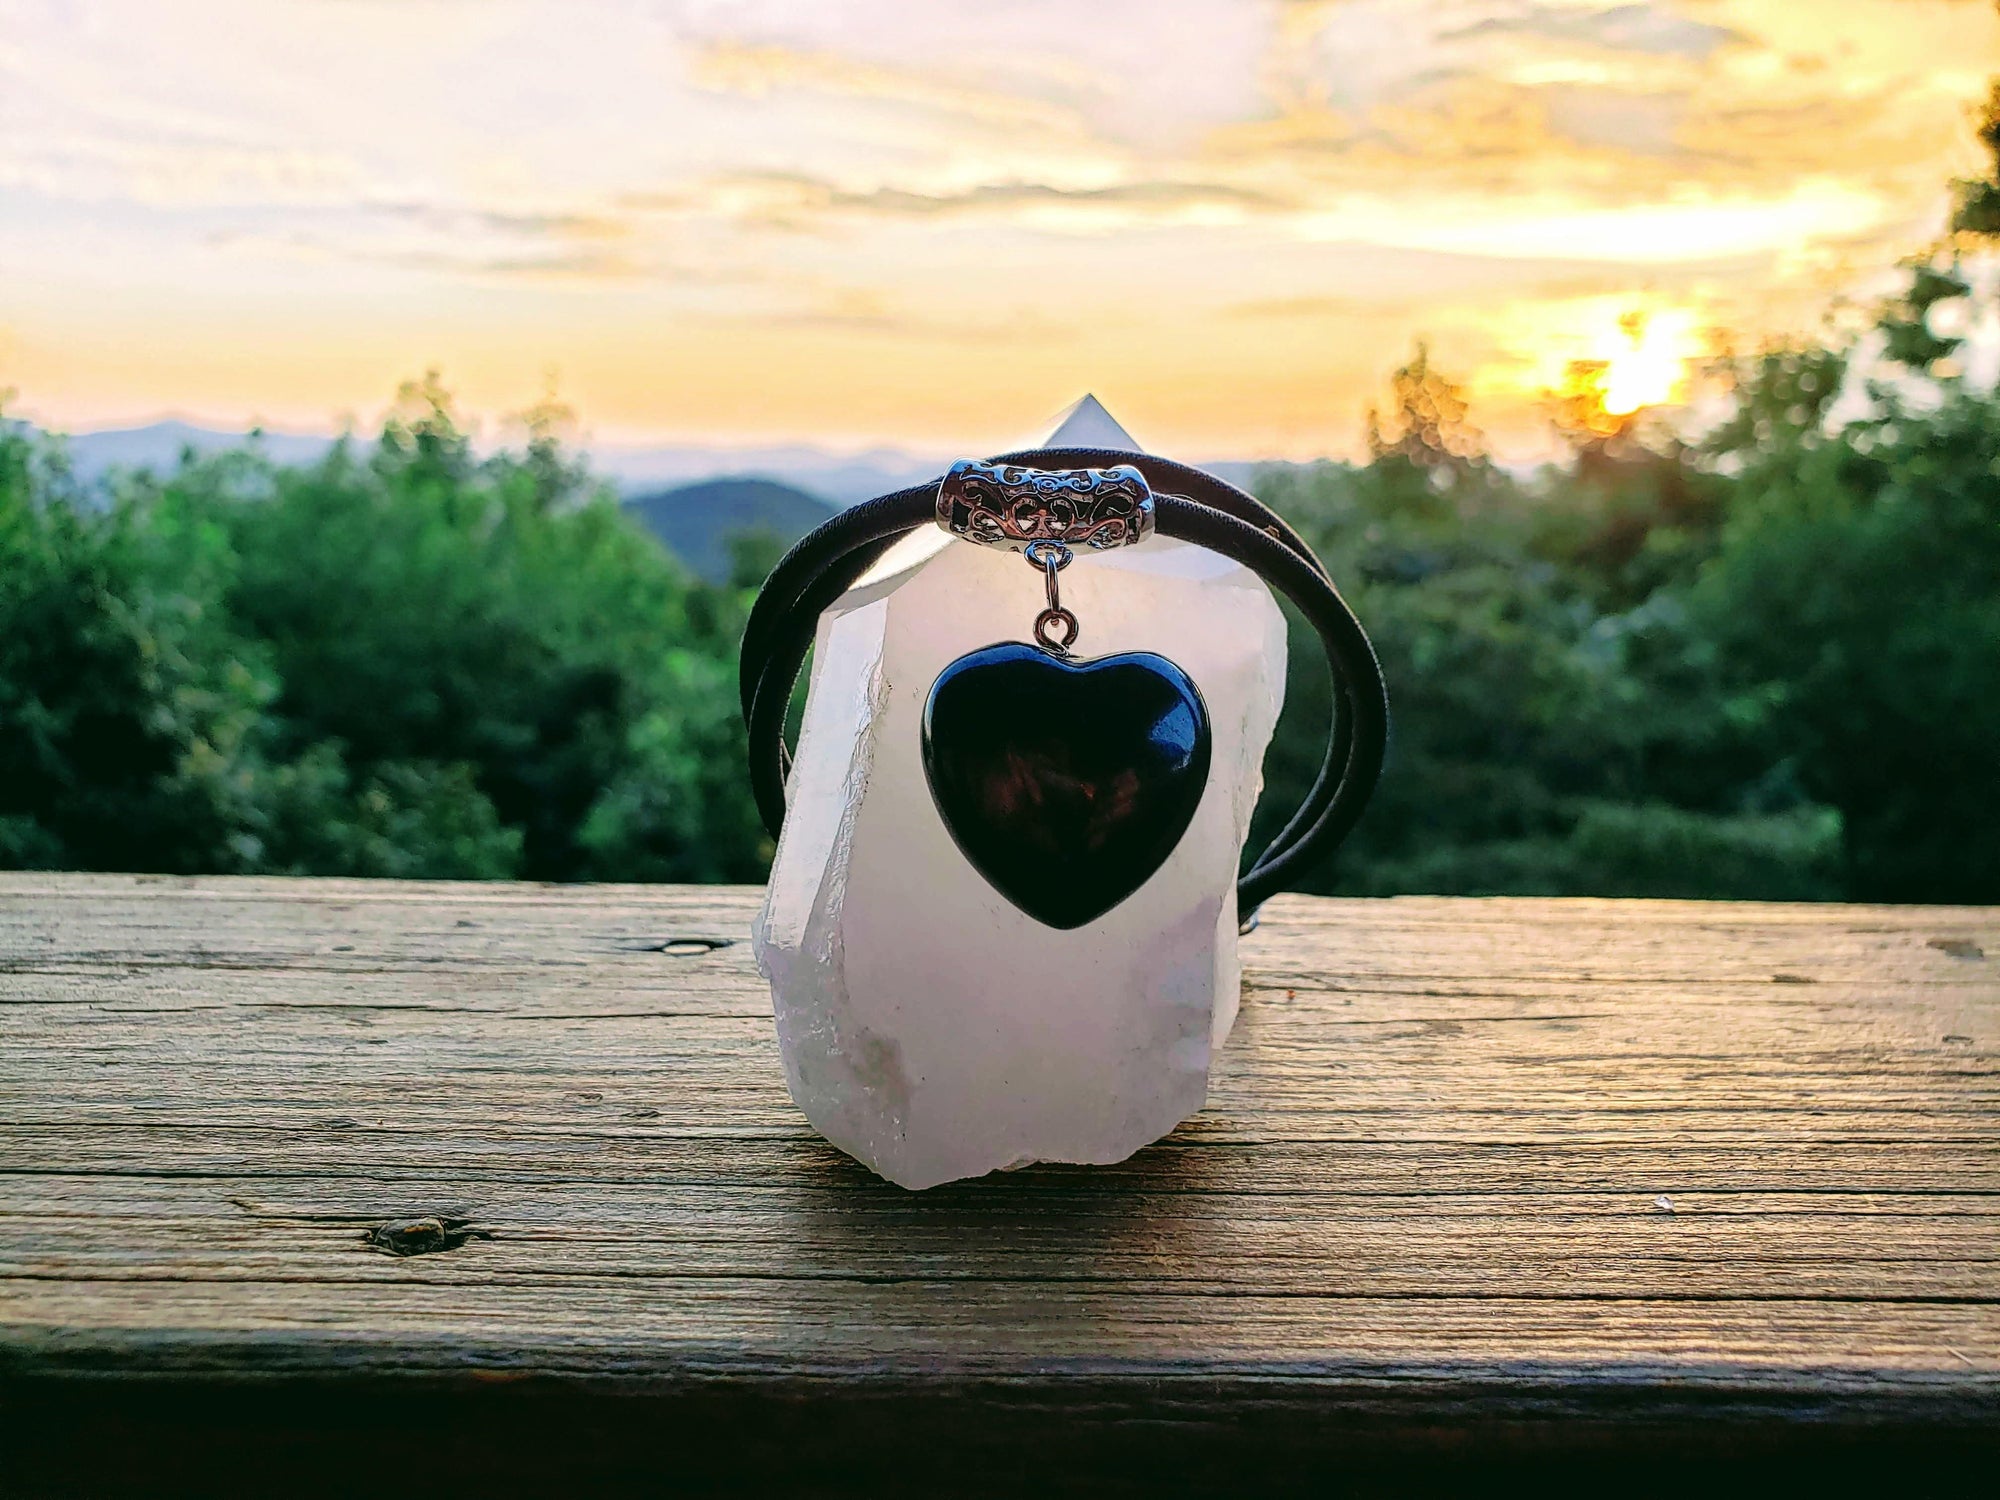 Puffy Heart Polished 100% Shungite Pendant and Leather Necklace - Karelia Creations